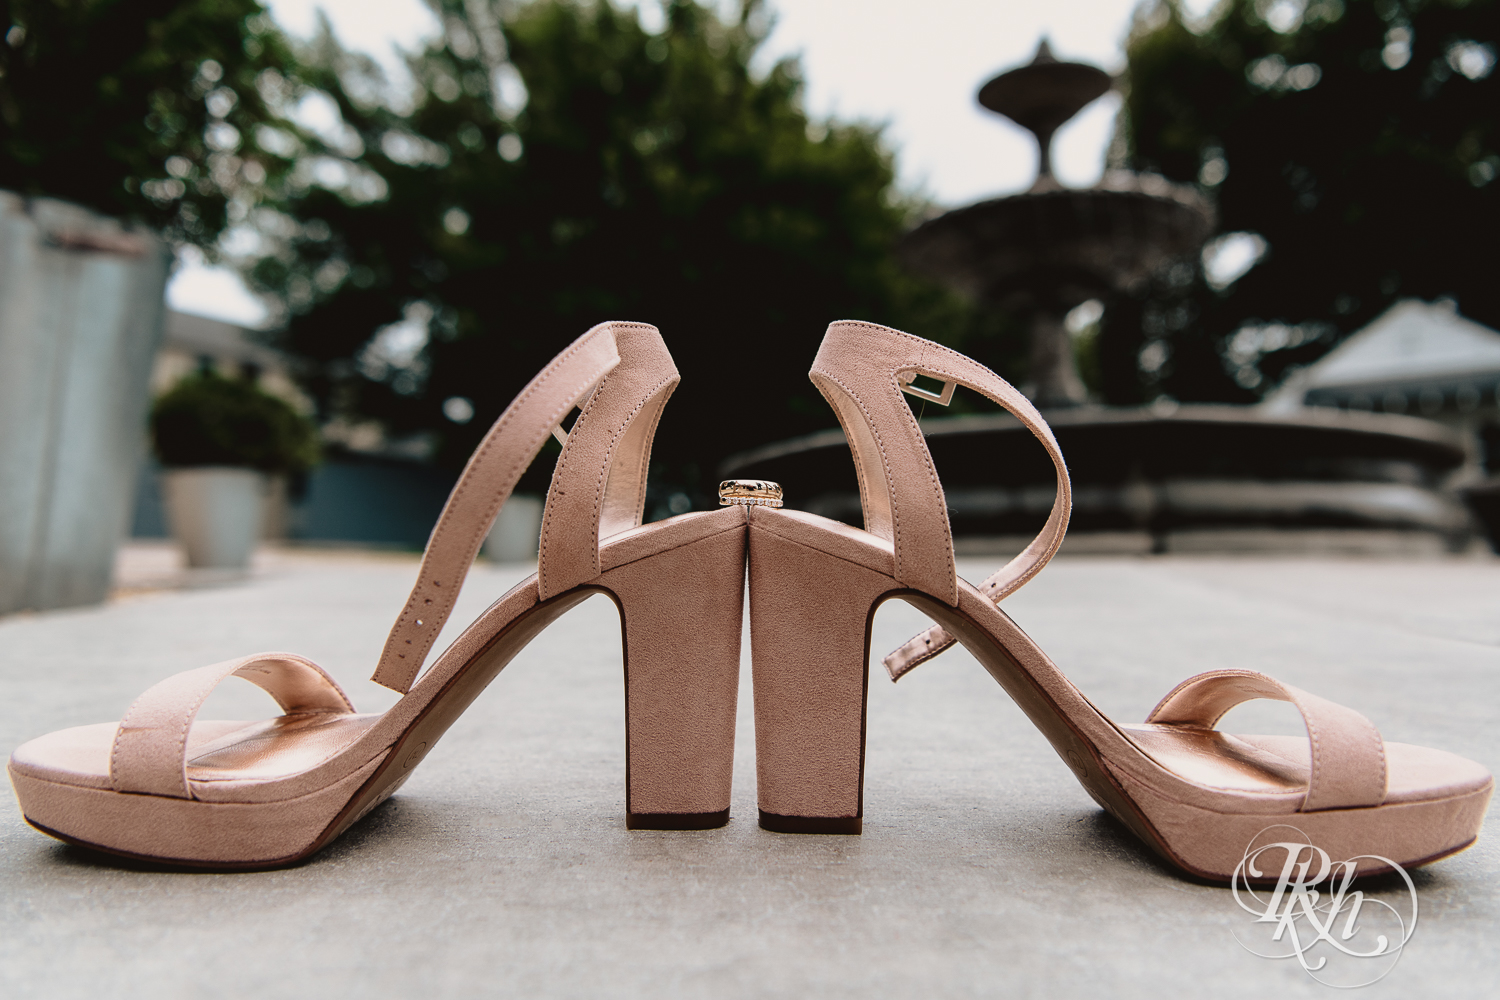 Wedding details including shoes and invites and rings at Legacy Hills Farm in Welch, Minnesota.